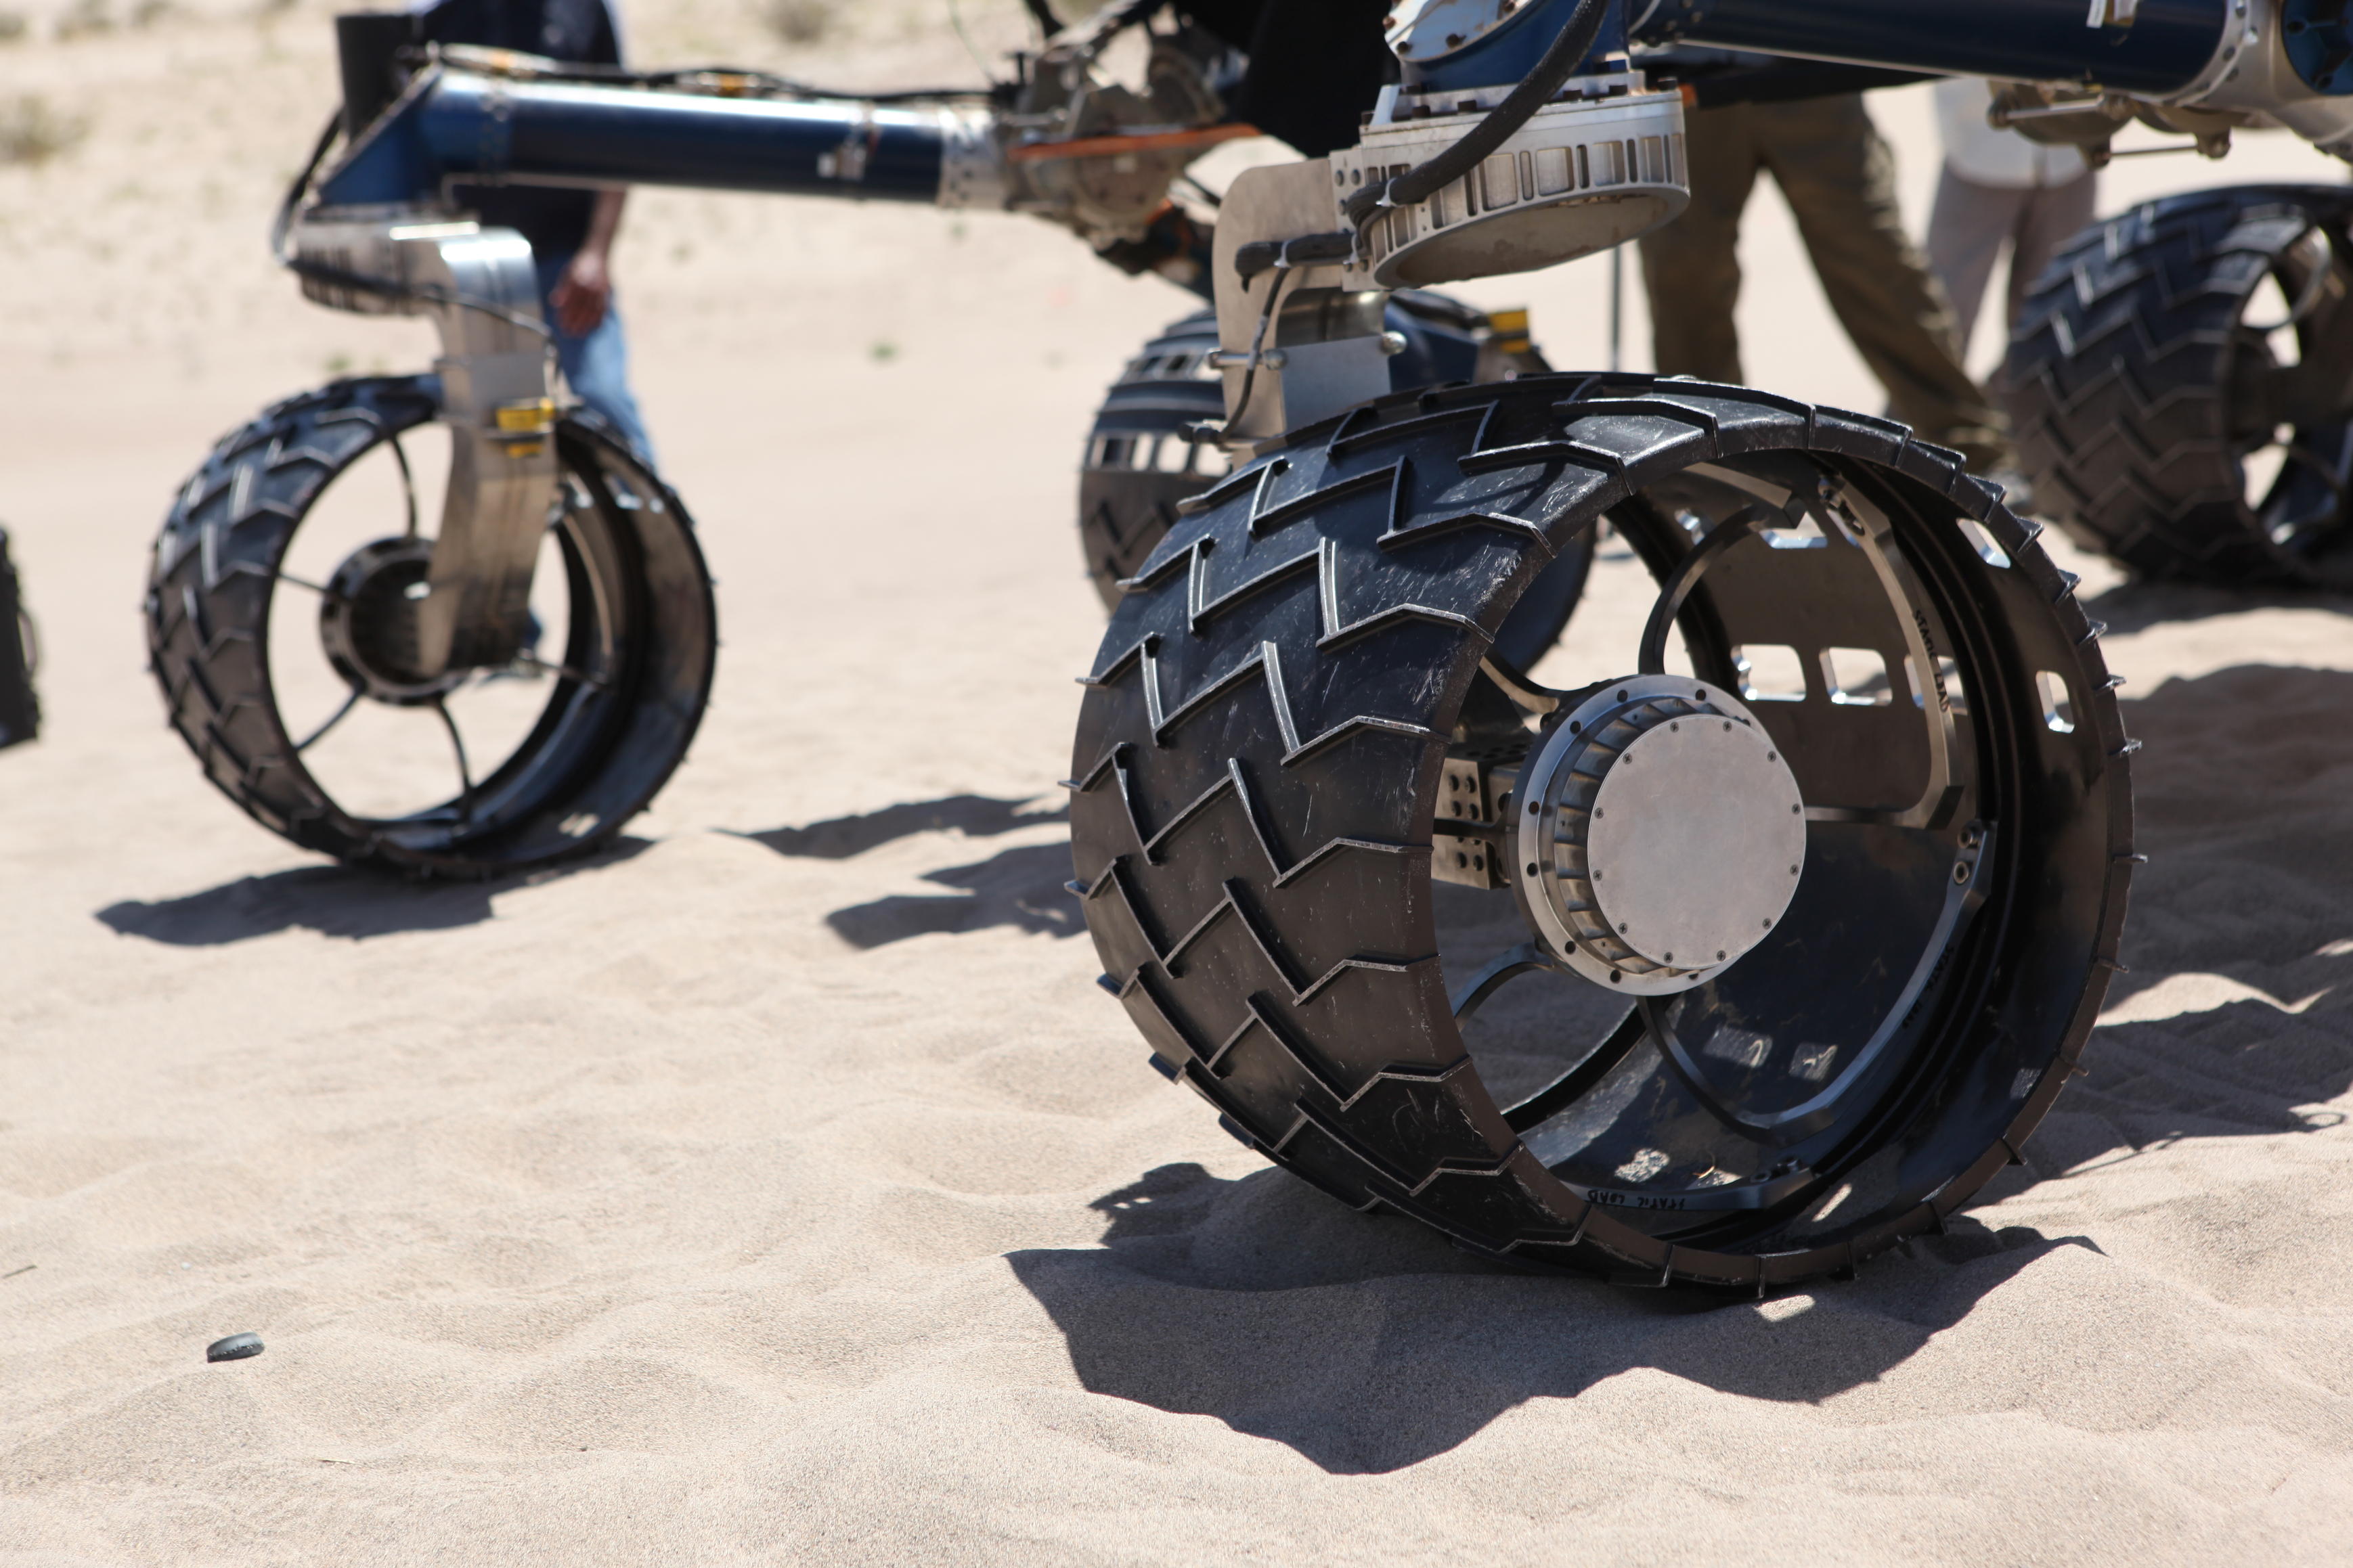 wheel, test, Scarecrow, Mars rover Rover wheels on Scarecrow with chevron-shaped treads rest on sand in Dumont dunes.